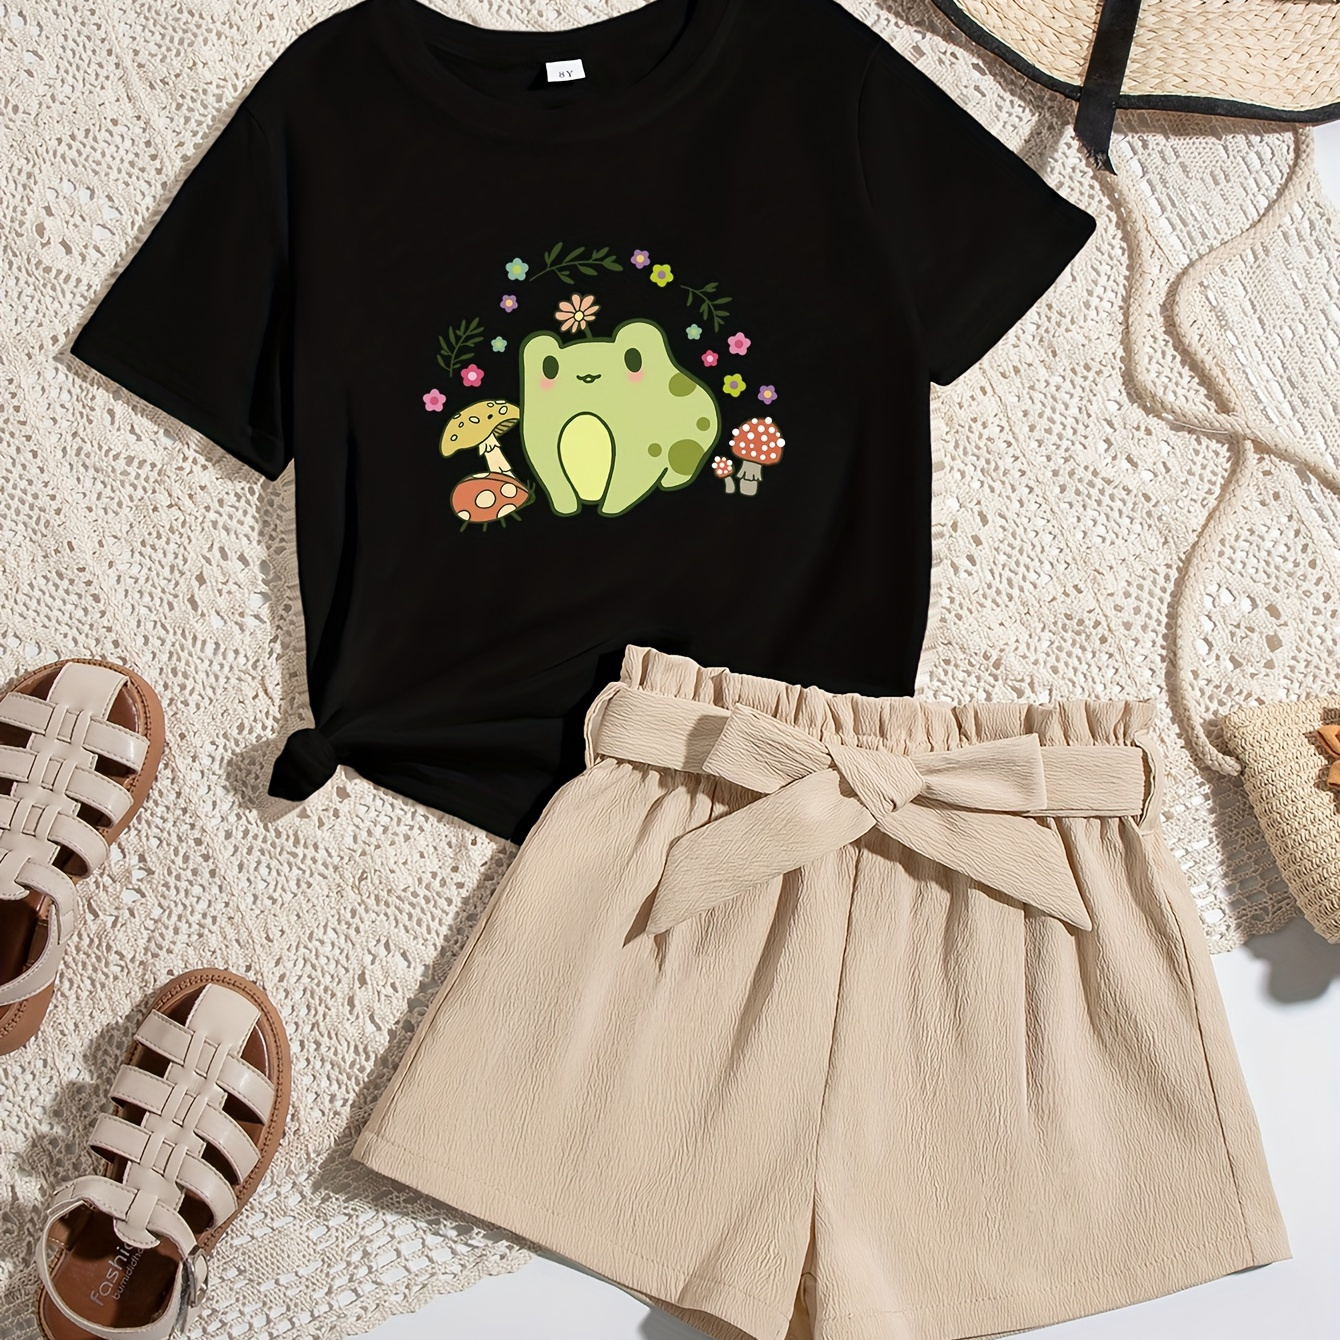 

Cute Cartoon Frog With Mushroom Graphic Print, Tween Girls' Casual & Stylish Outfit, 2pcs/set Short Sleeve Crew Neck Tee & High Waisted Paper Bag Shorts For Spring & Summer, Tween Girls' Clothing